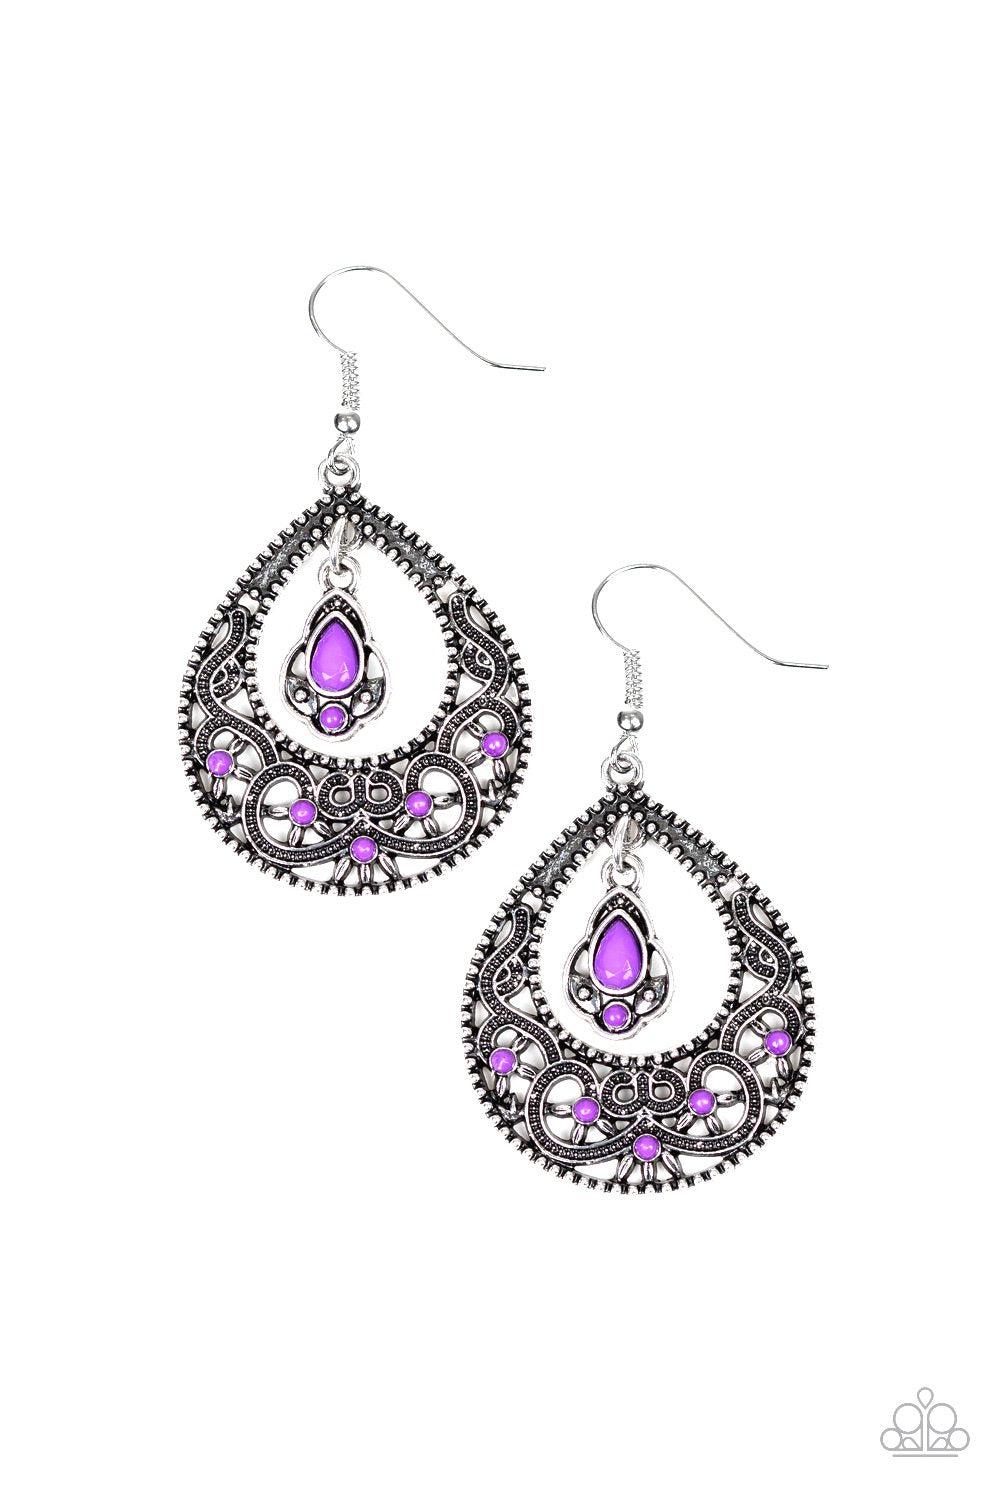 All-Girl Glow Purple and Silver Teardrop Earrings - Paparazzi Accessories-CarasShop.com - $5 Jewelry by Cara Jewels